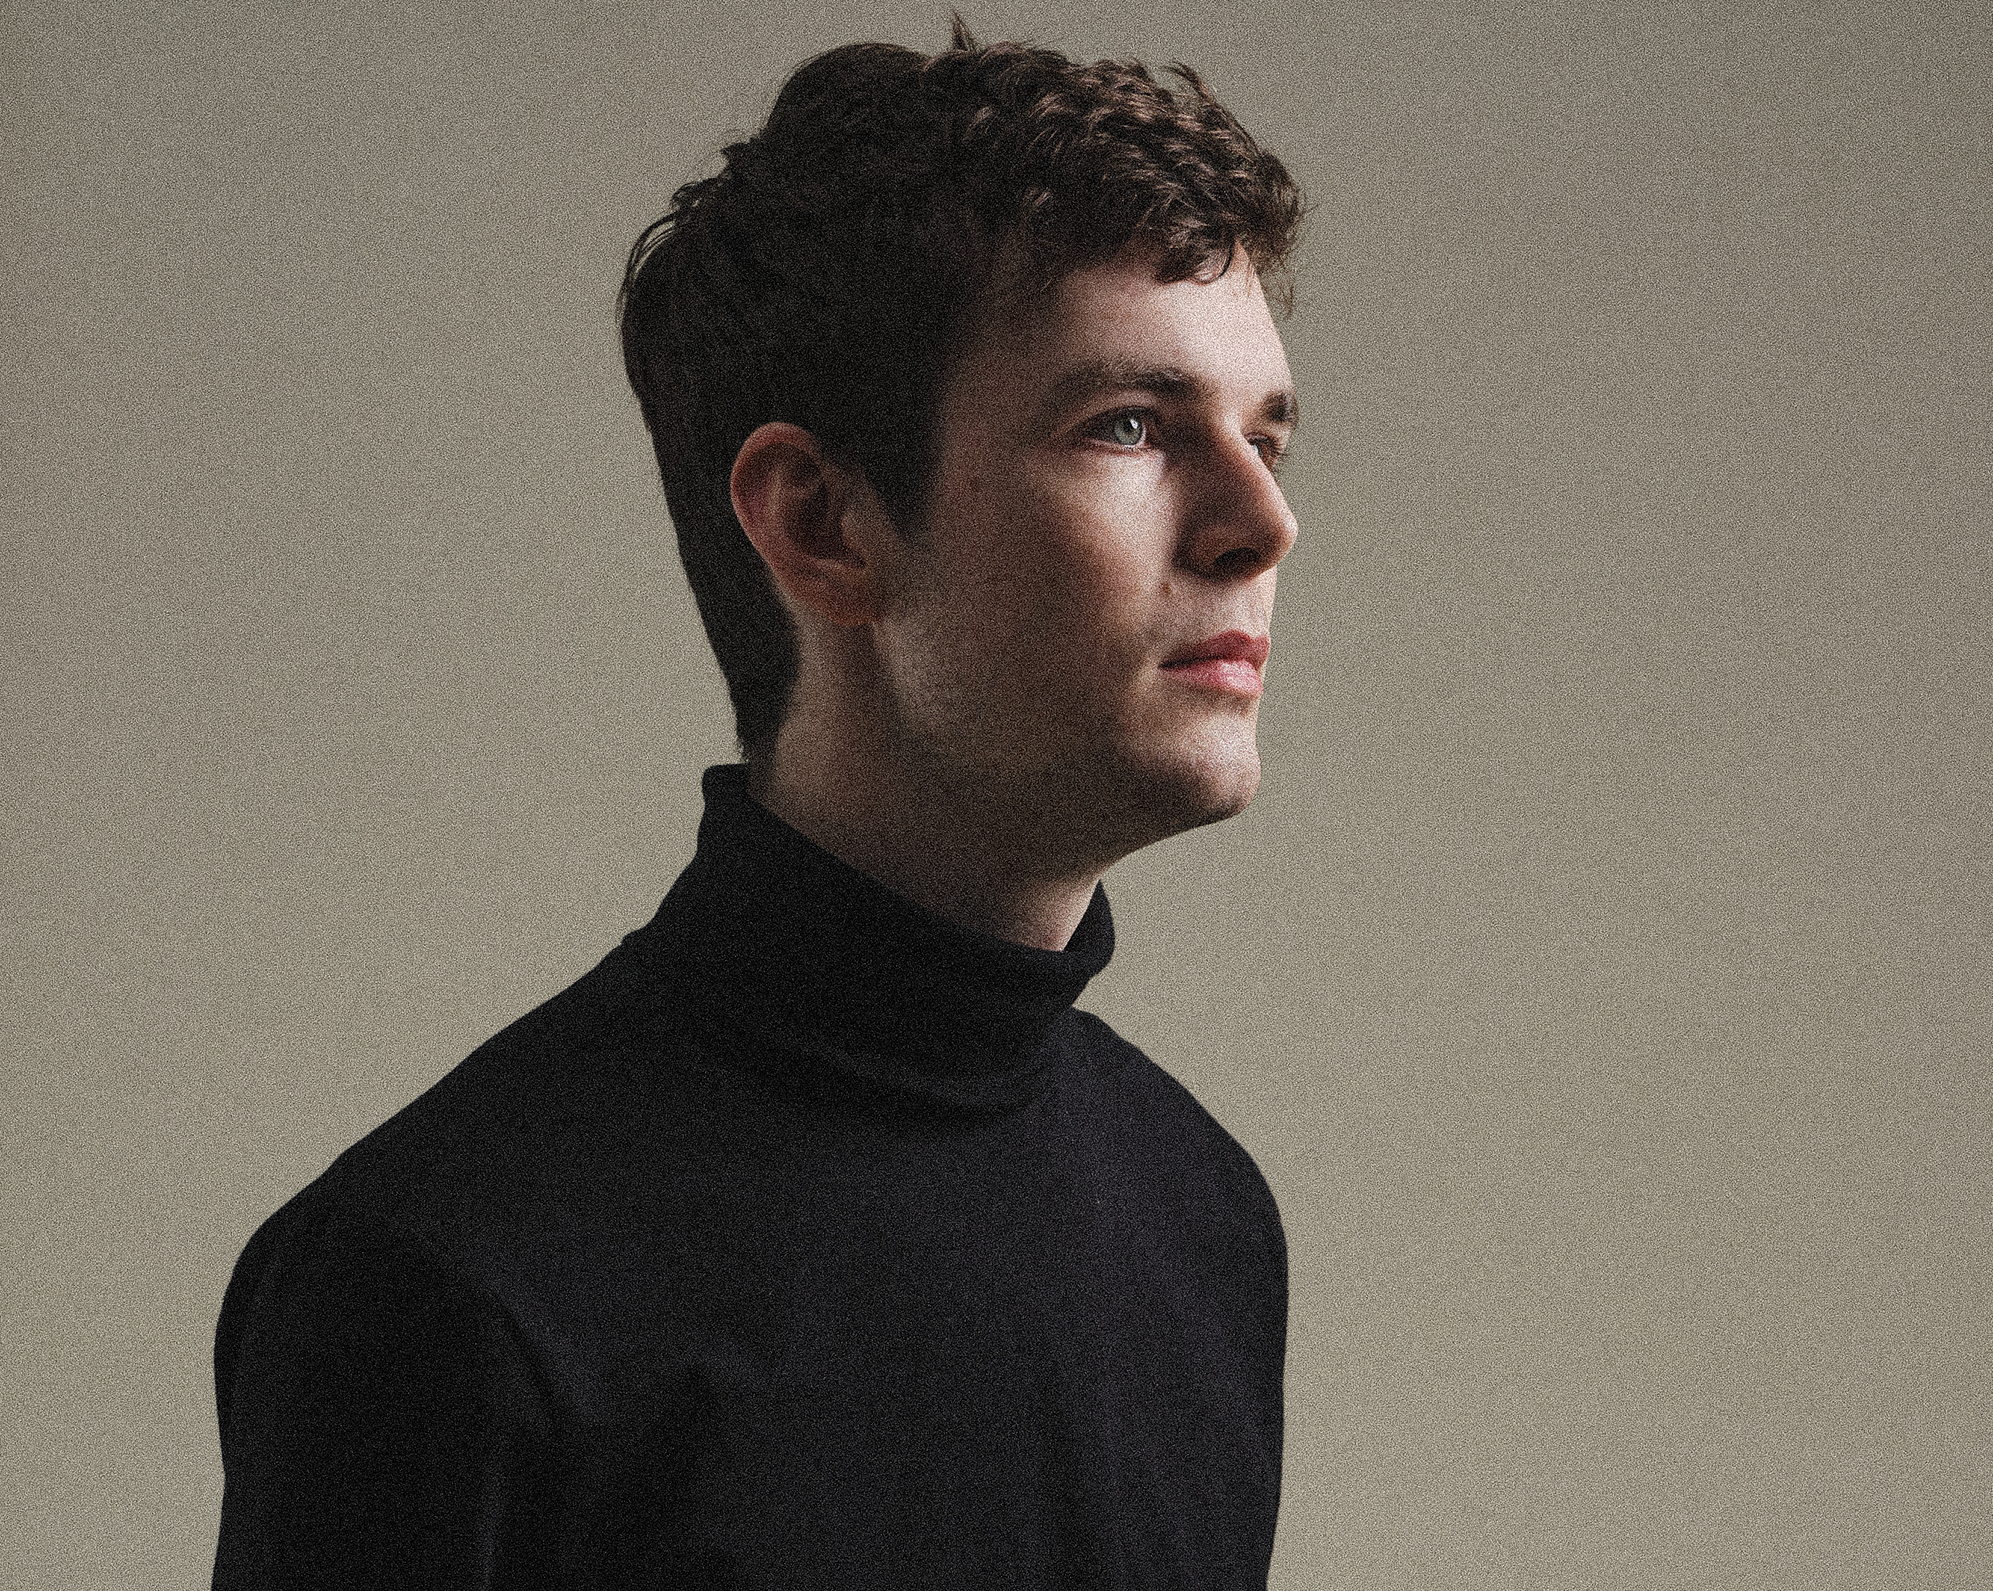 TRACK PREMIERE: Cathal Murphy releases new single 'Blue In The Best Way' - Listen Now! 